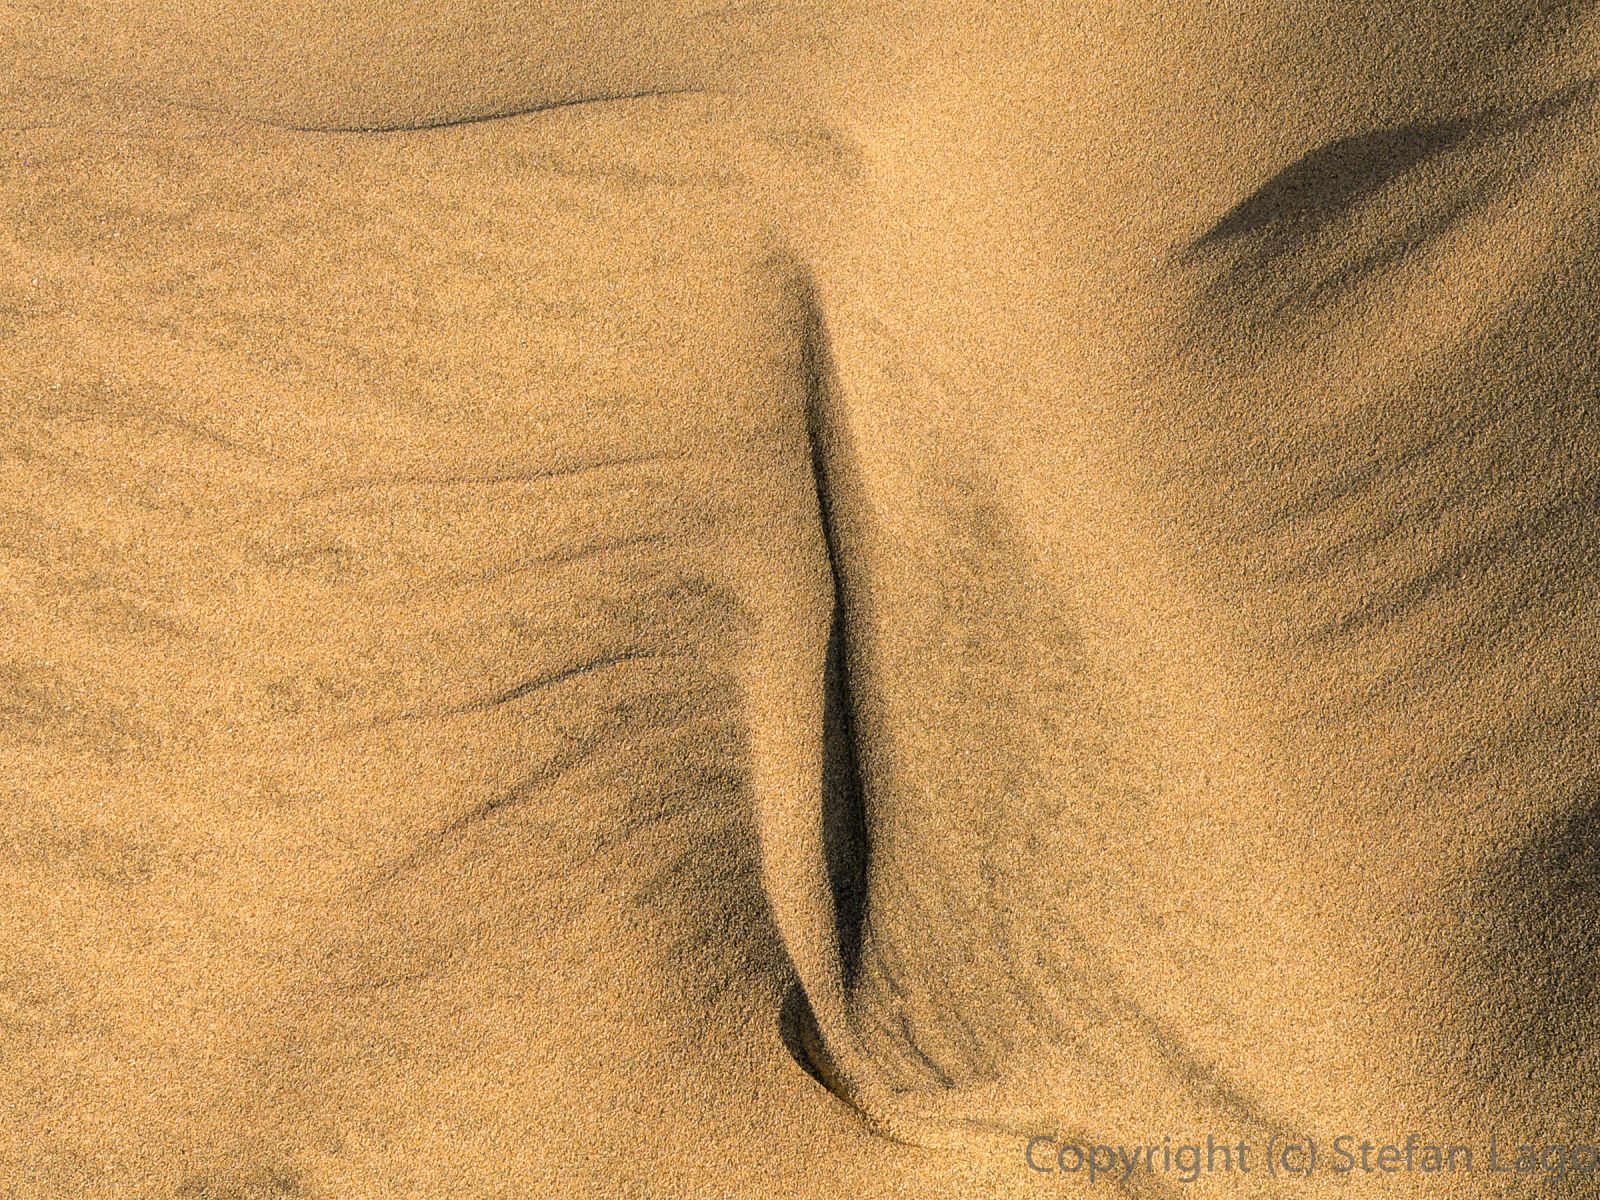 Windformed patterns in the dunes of Maspalomas, Gran Canaria.(2560 x 1920 px)